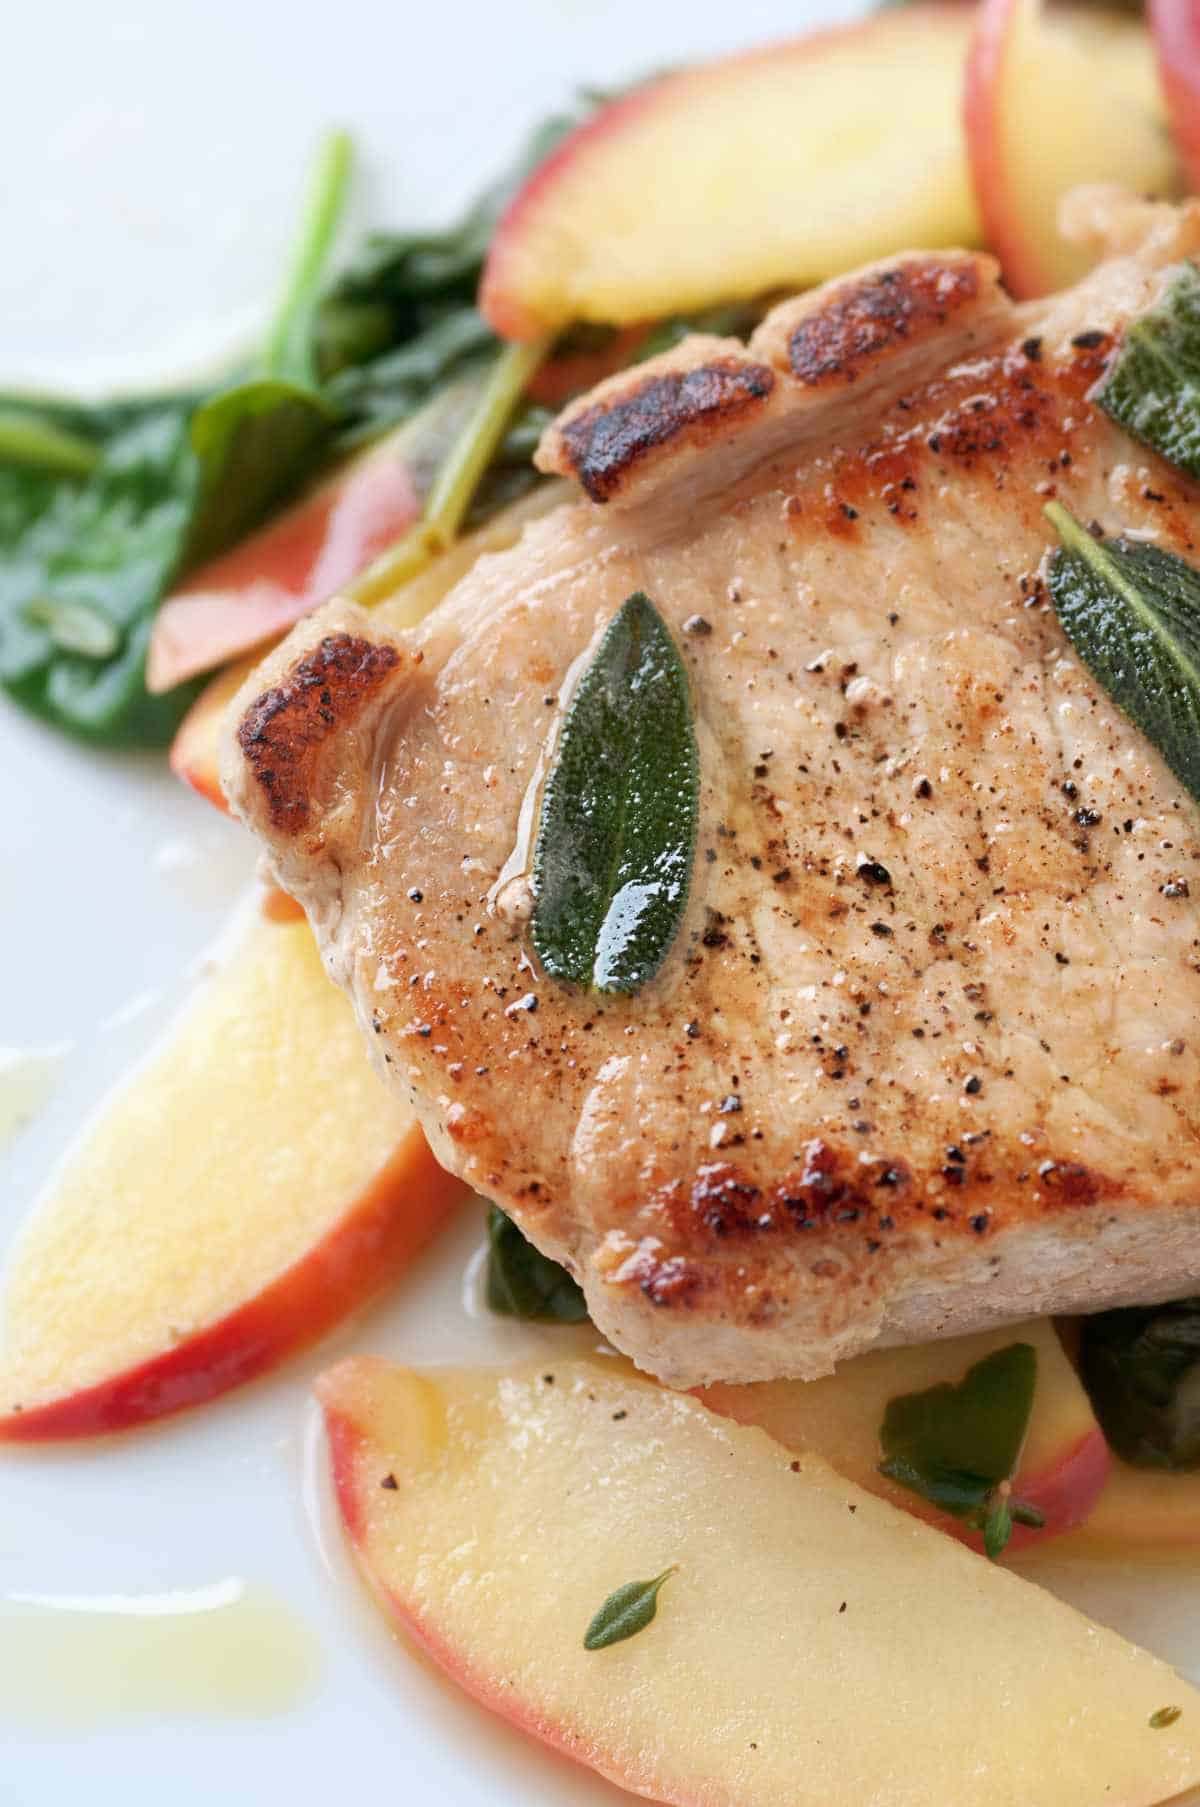 Golden brown pork chops with warm apple and sage leaves.